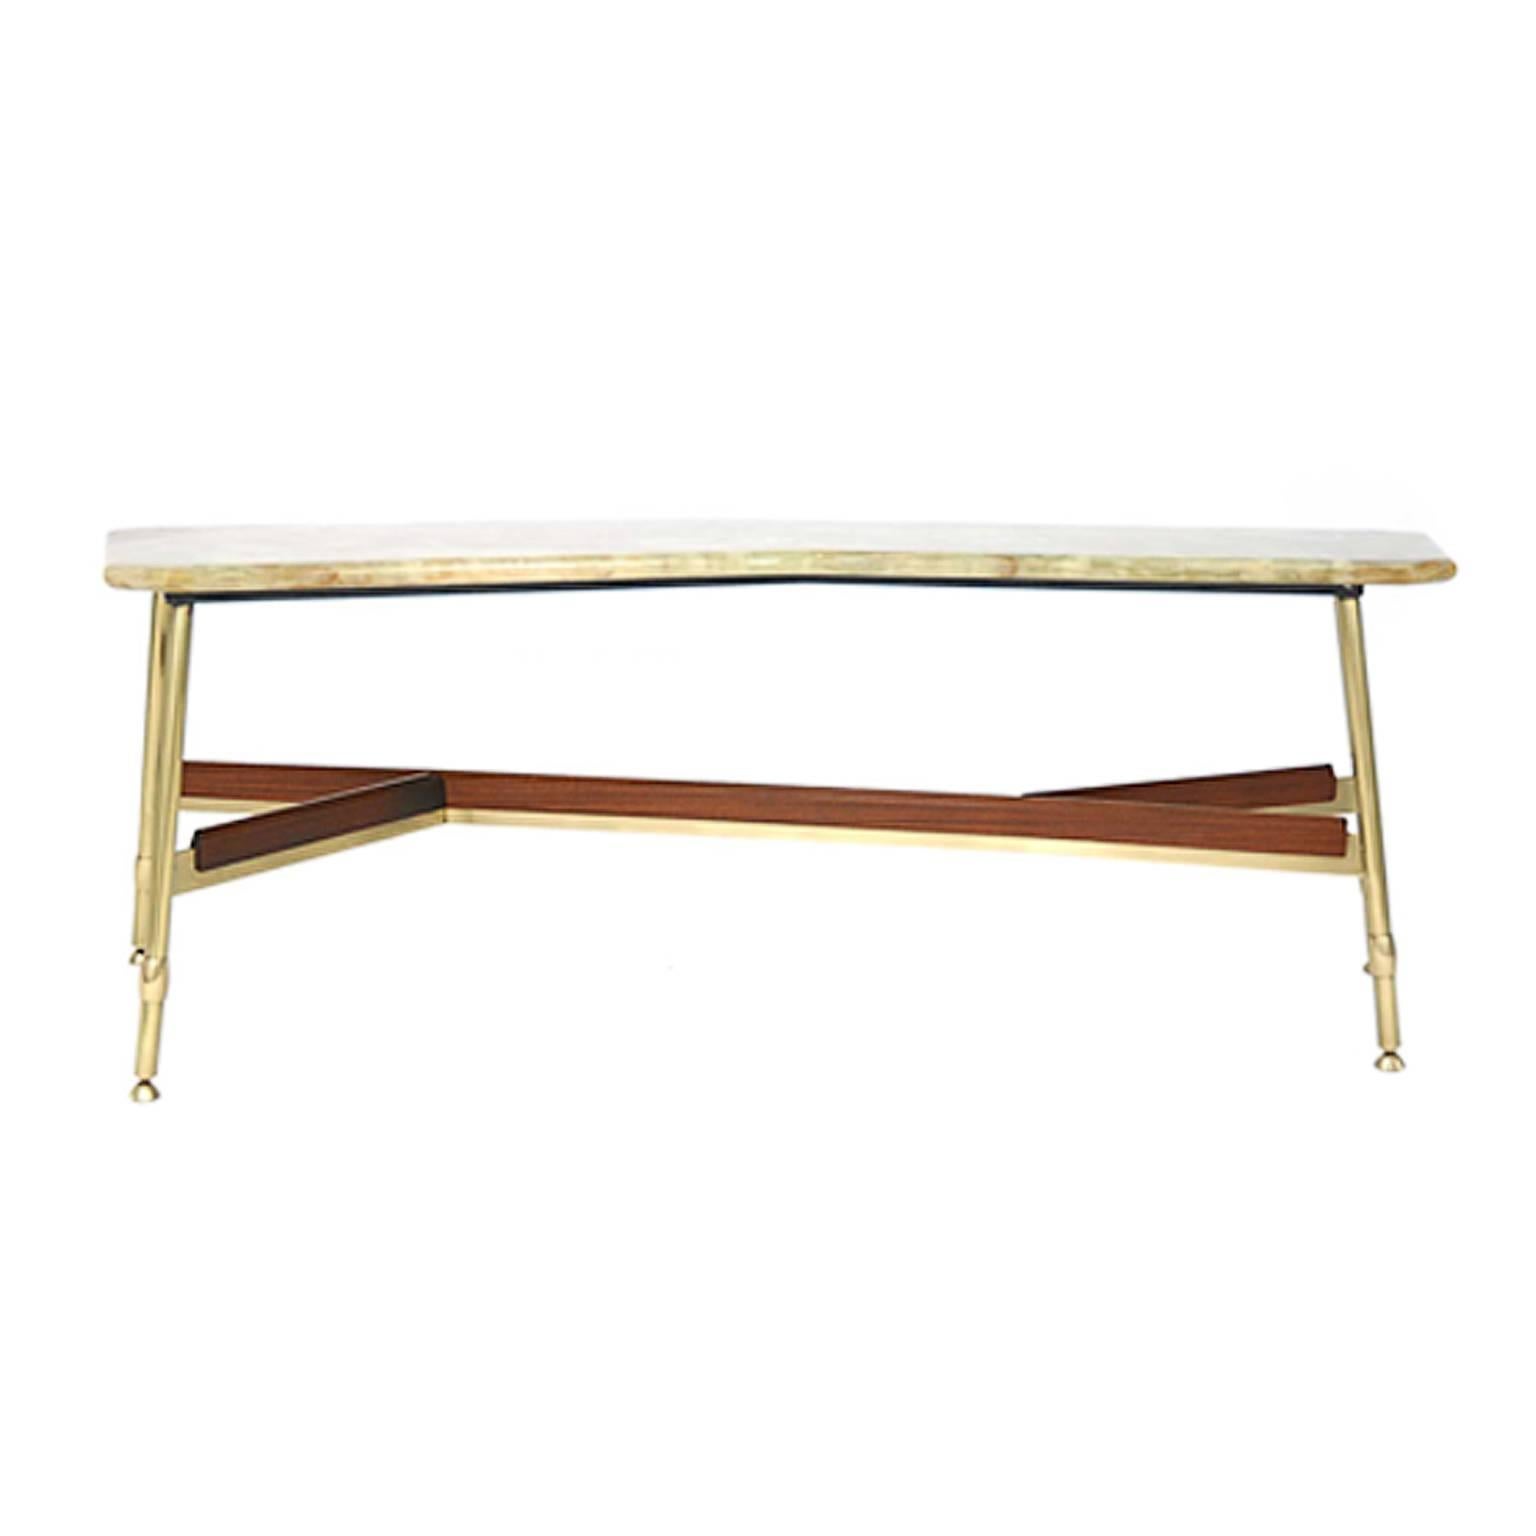 This piece was manufactured in Italy in 1950. The tabletop is made of onyx. The furniture frame is made of brass with mahogany bars.